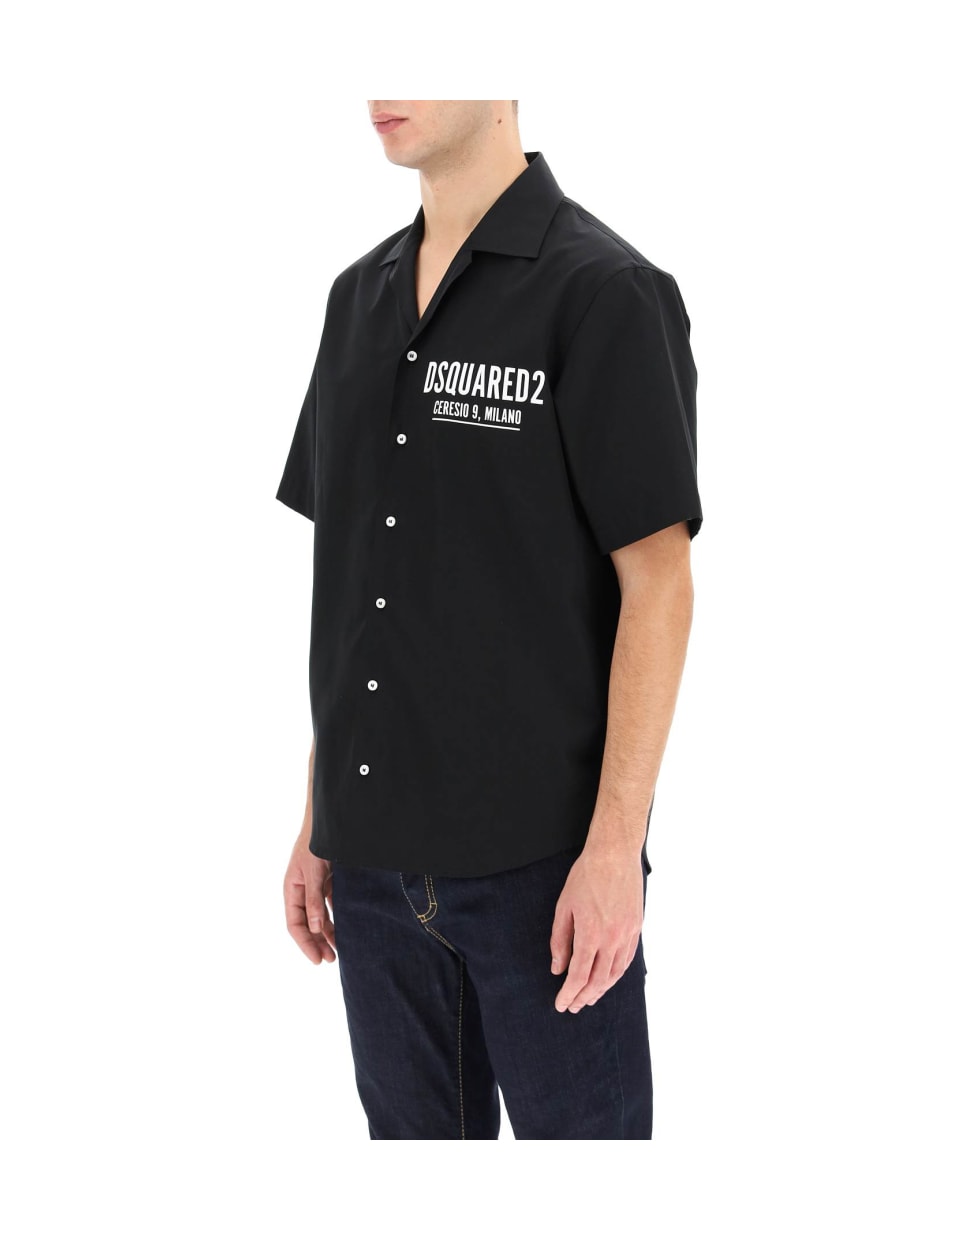 Dsquared2 Ceresio 9 Short Sleeve Shirt | italist, ALWAYS LIKE A SALE